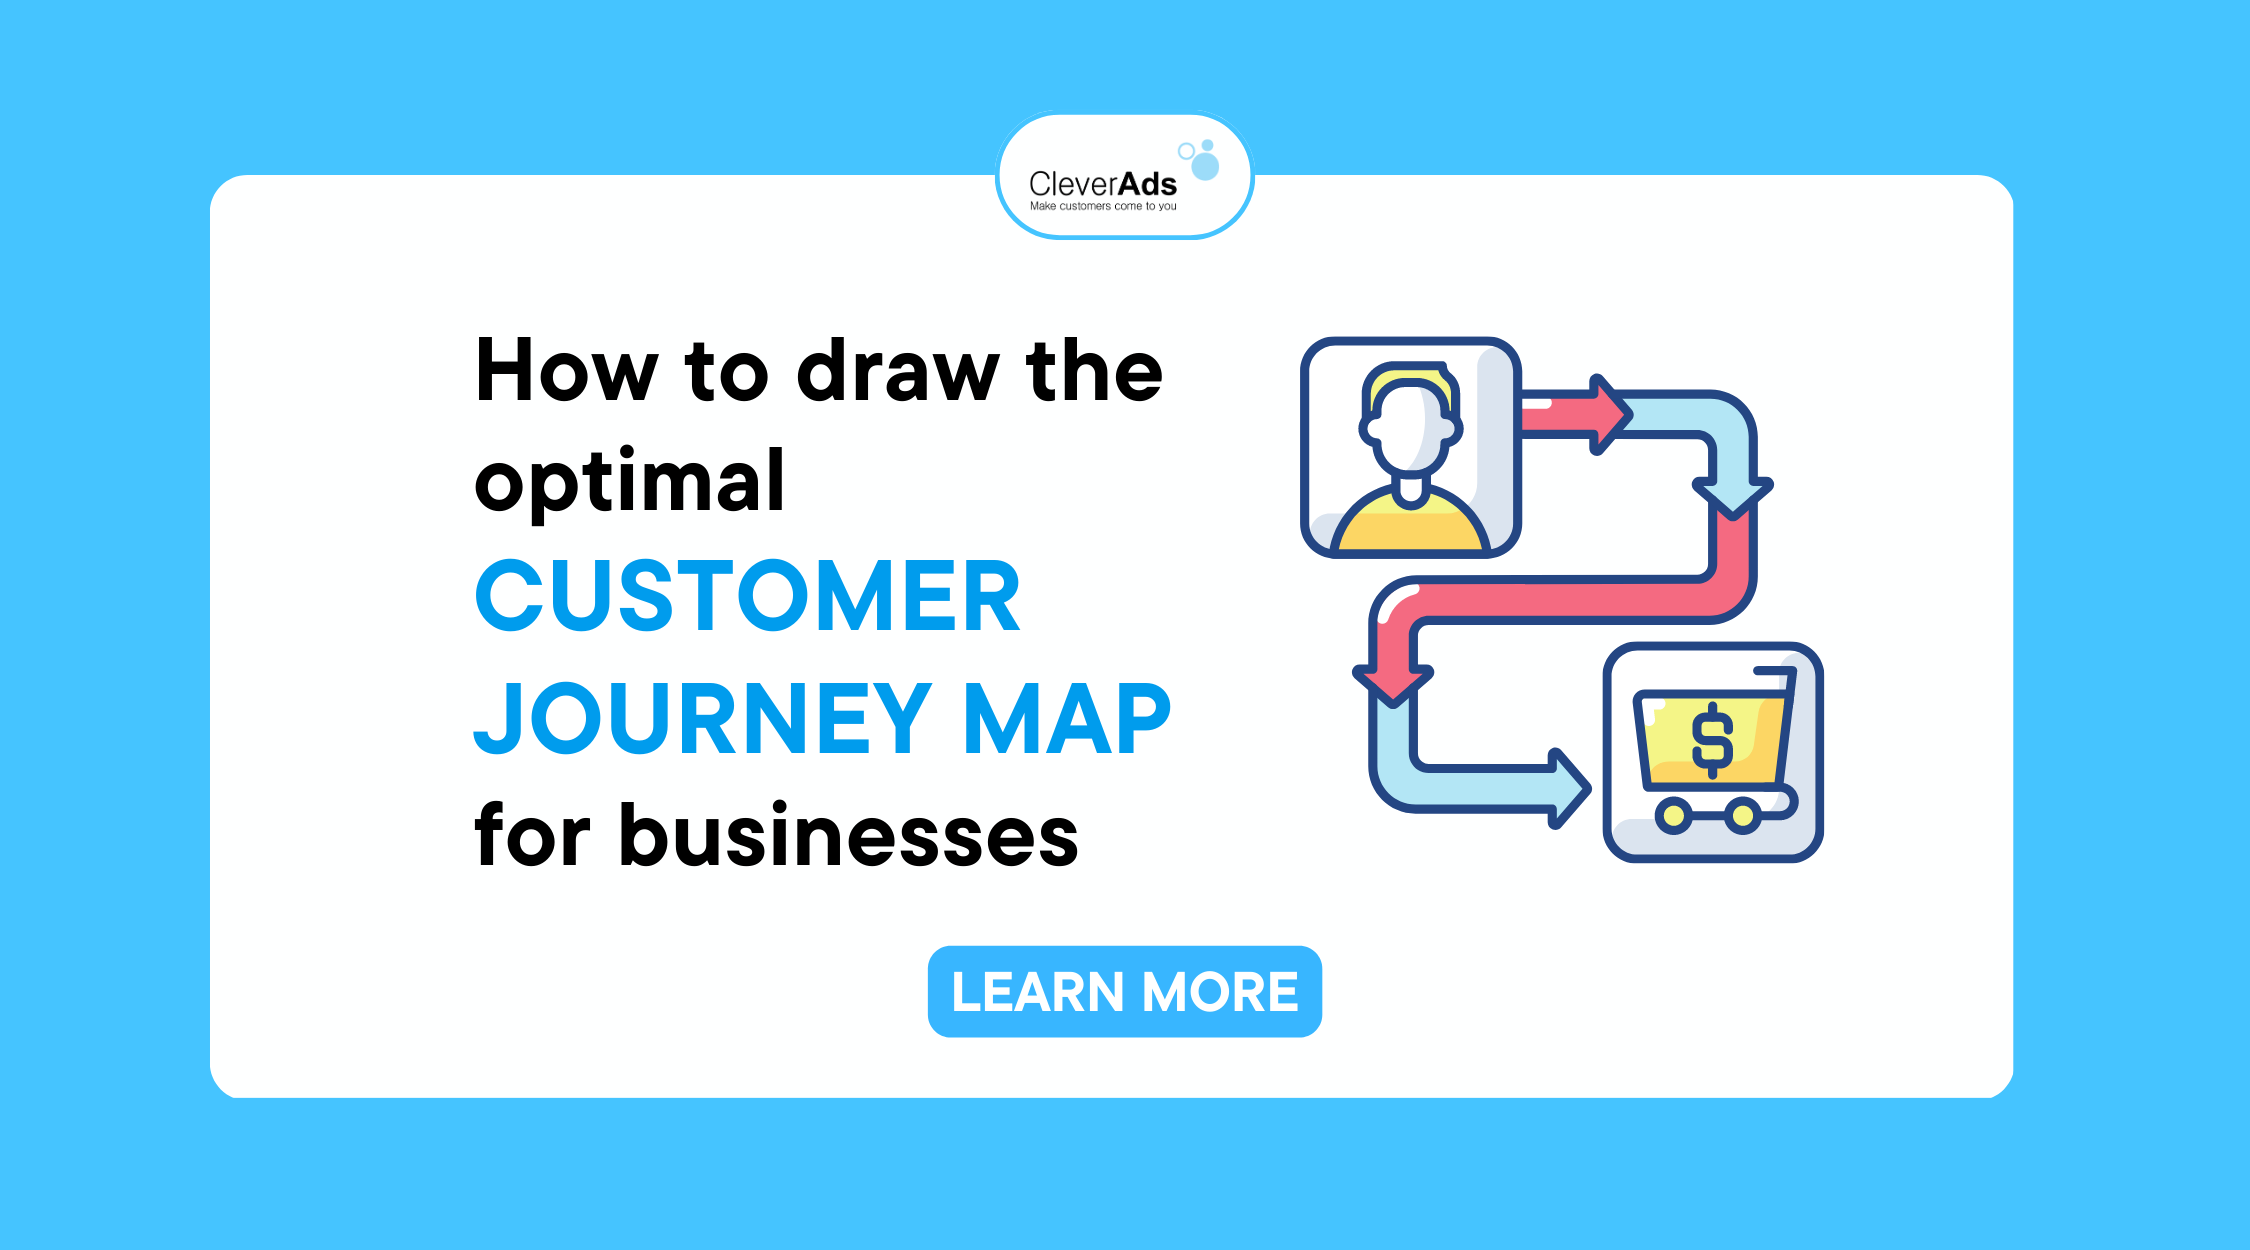 How to draw the optimal customer journey map for businesses